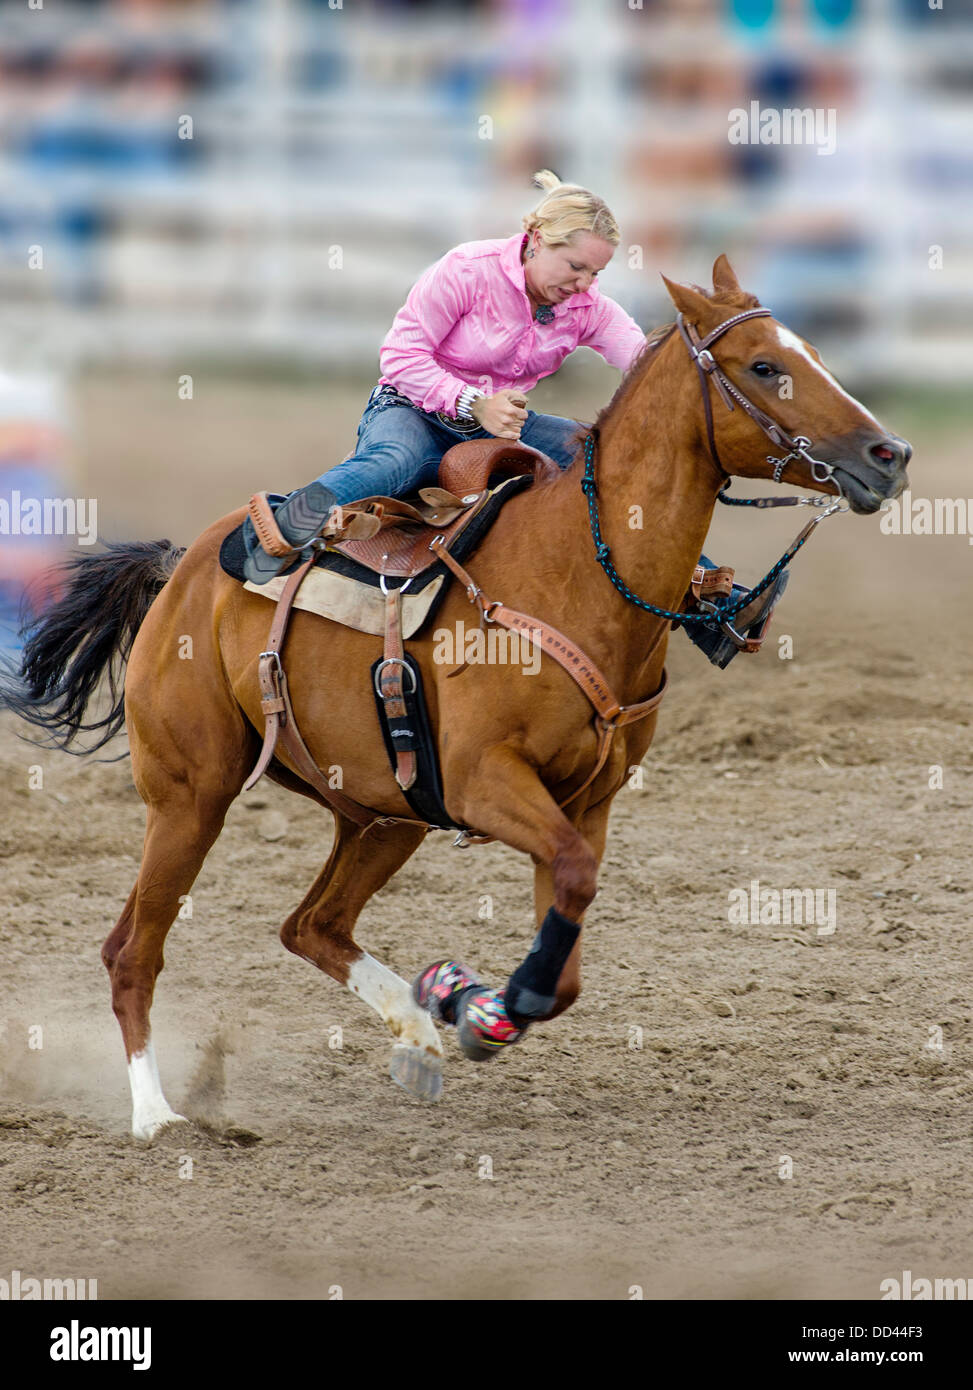 Cowgirl on horseback riding in the ladies barrel racing event, Chaffee County Fair & Rodeo Stock Photo